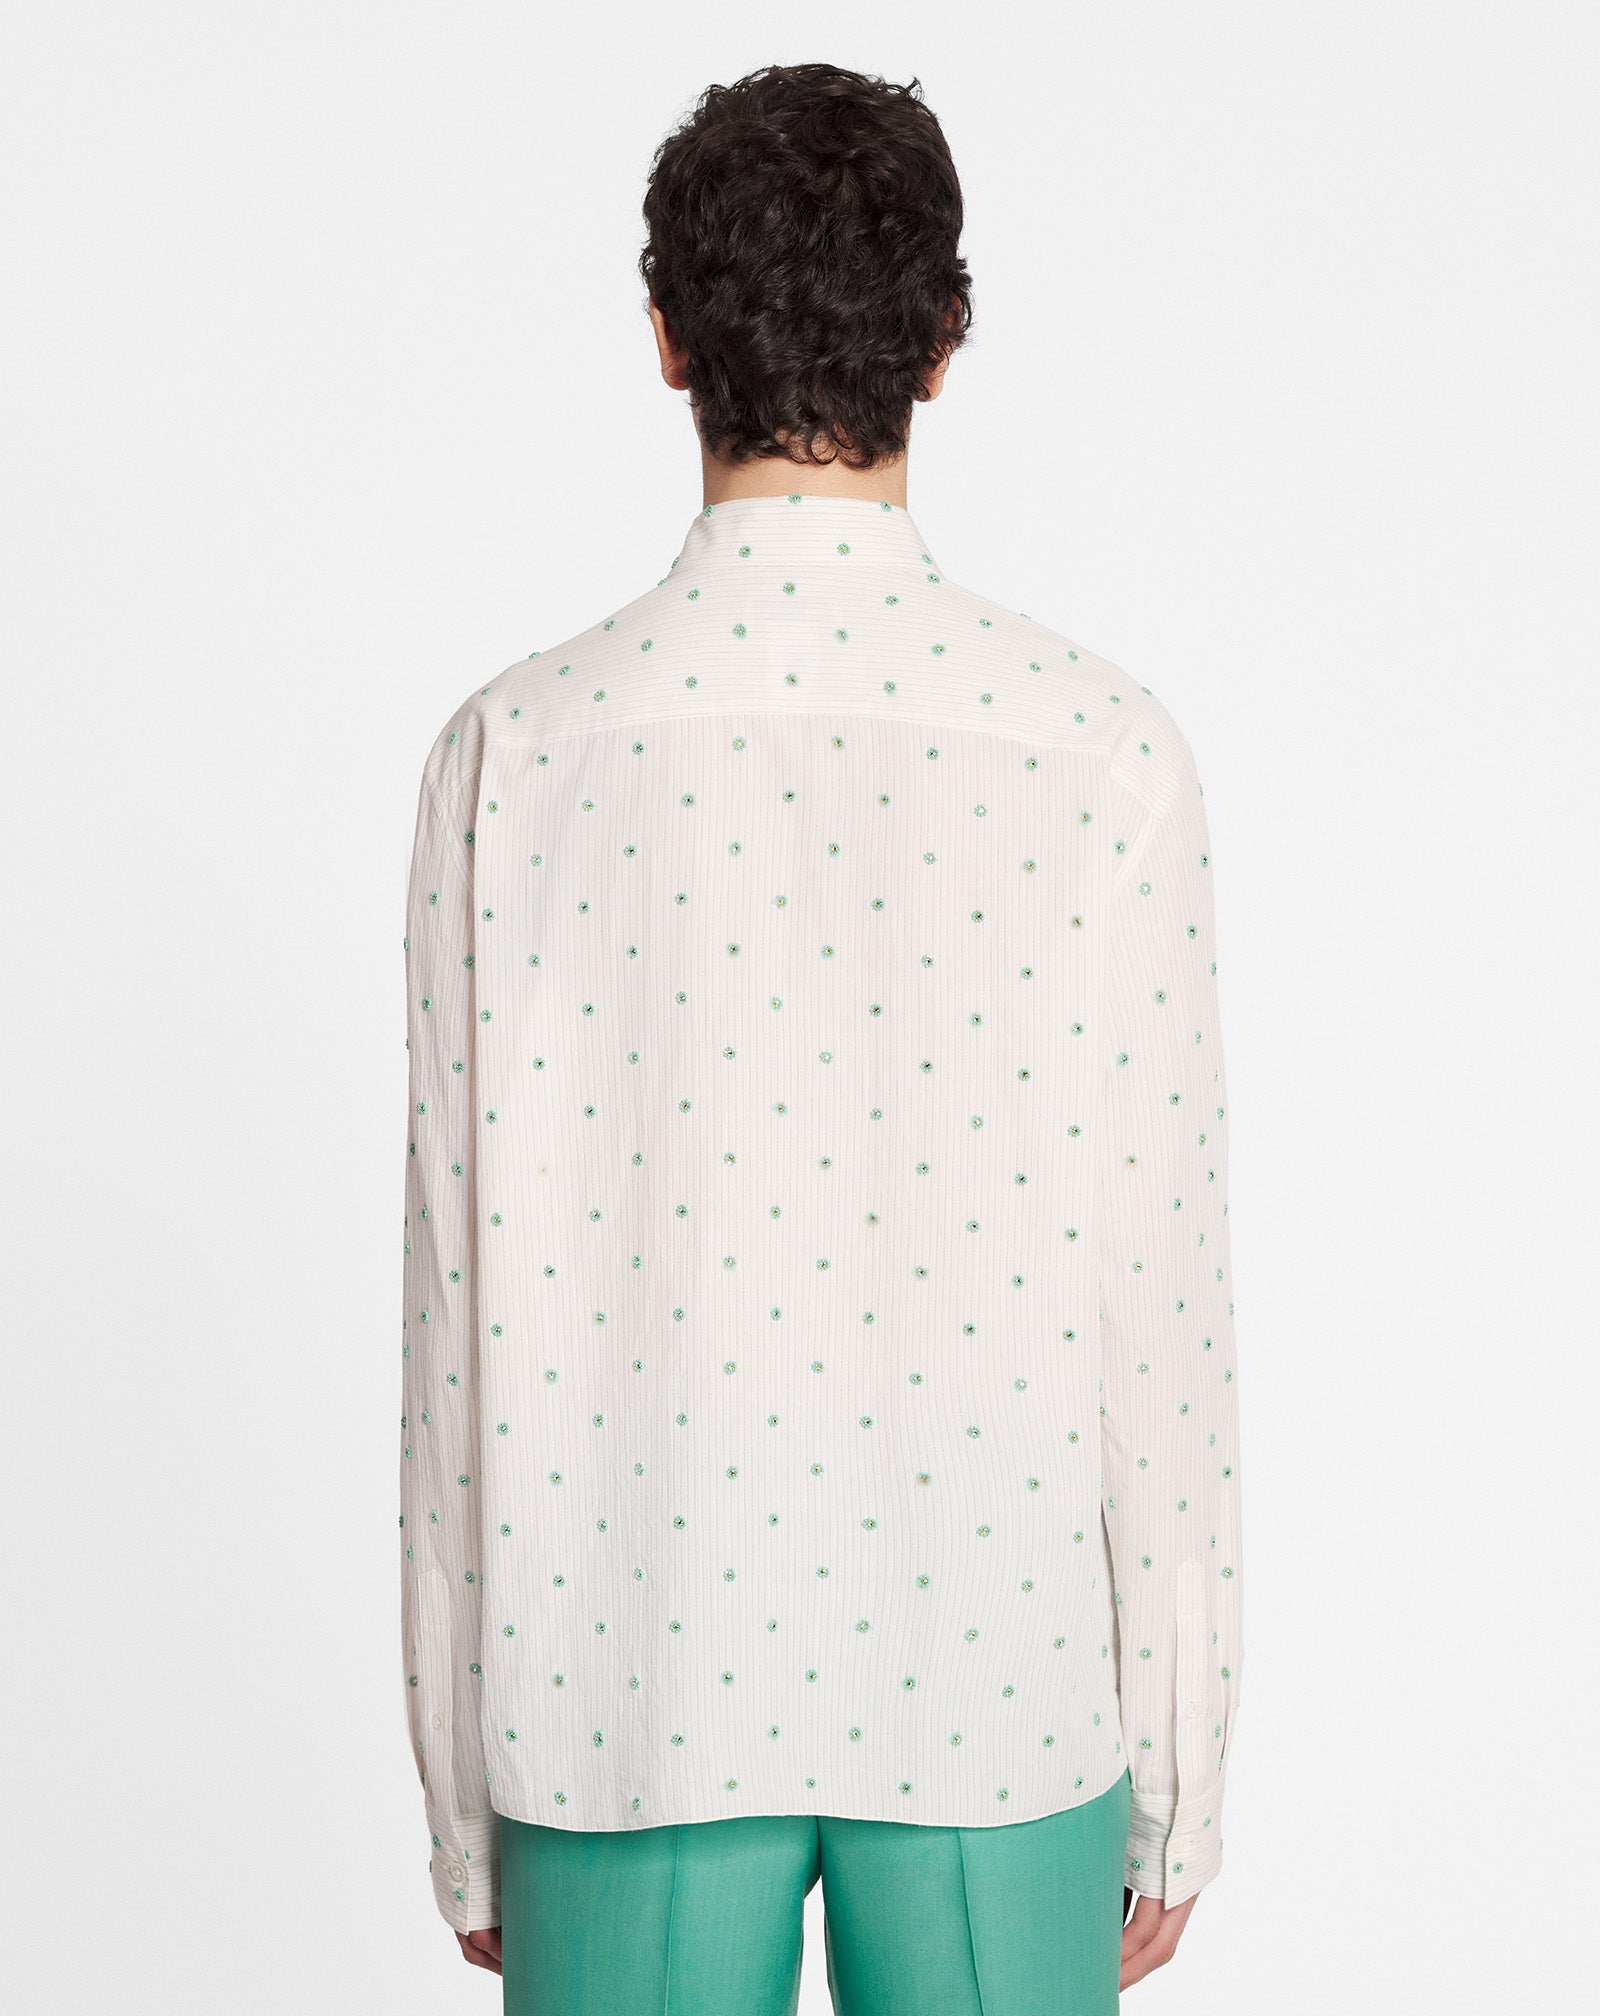 EMBROIDERED CLASSIC SHIRT, MILK